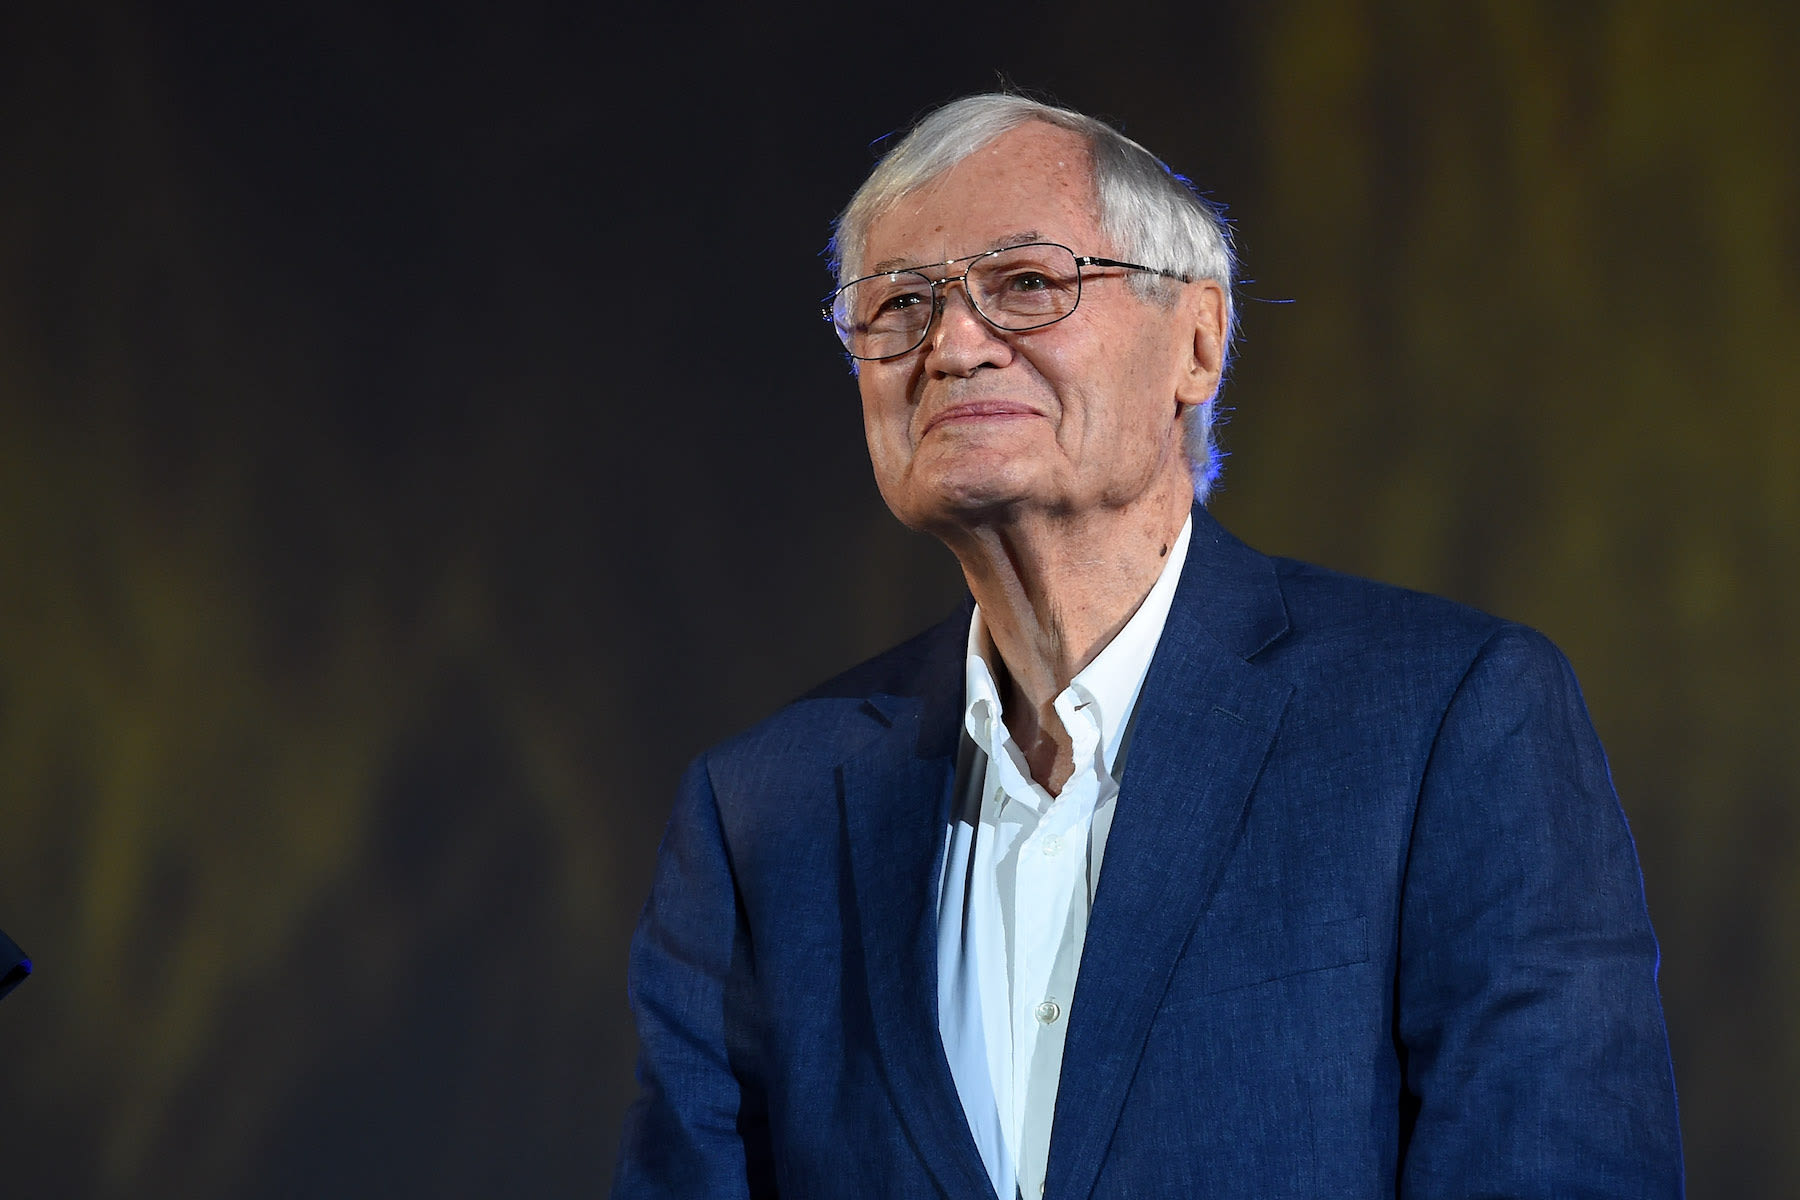 To B or Not to B? Why Roger Corman Was One of the Most Influential Figures in Movie History